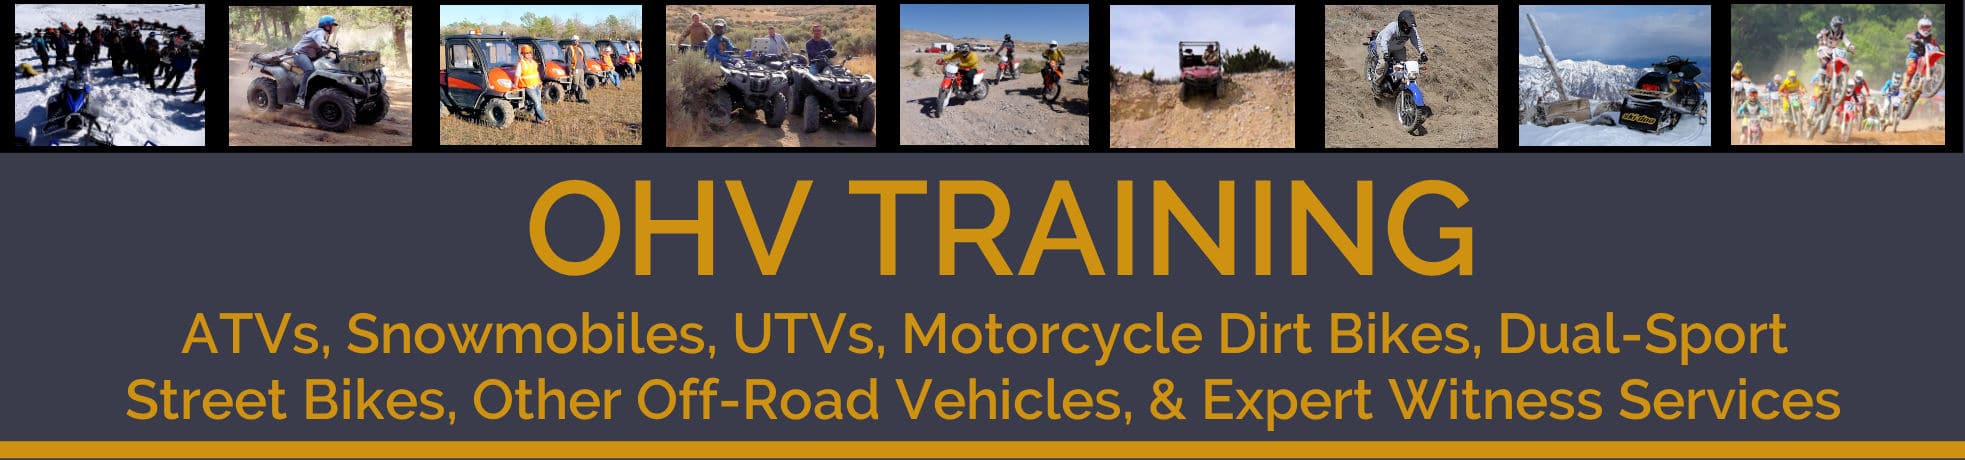 WWW.OHTtraining.org  safety training for ATVs, UTVs, snowmobiles, motorcycles & expert witness services